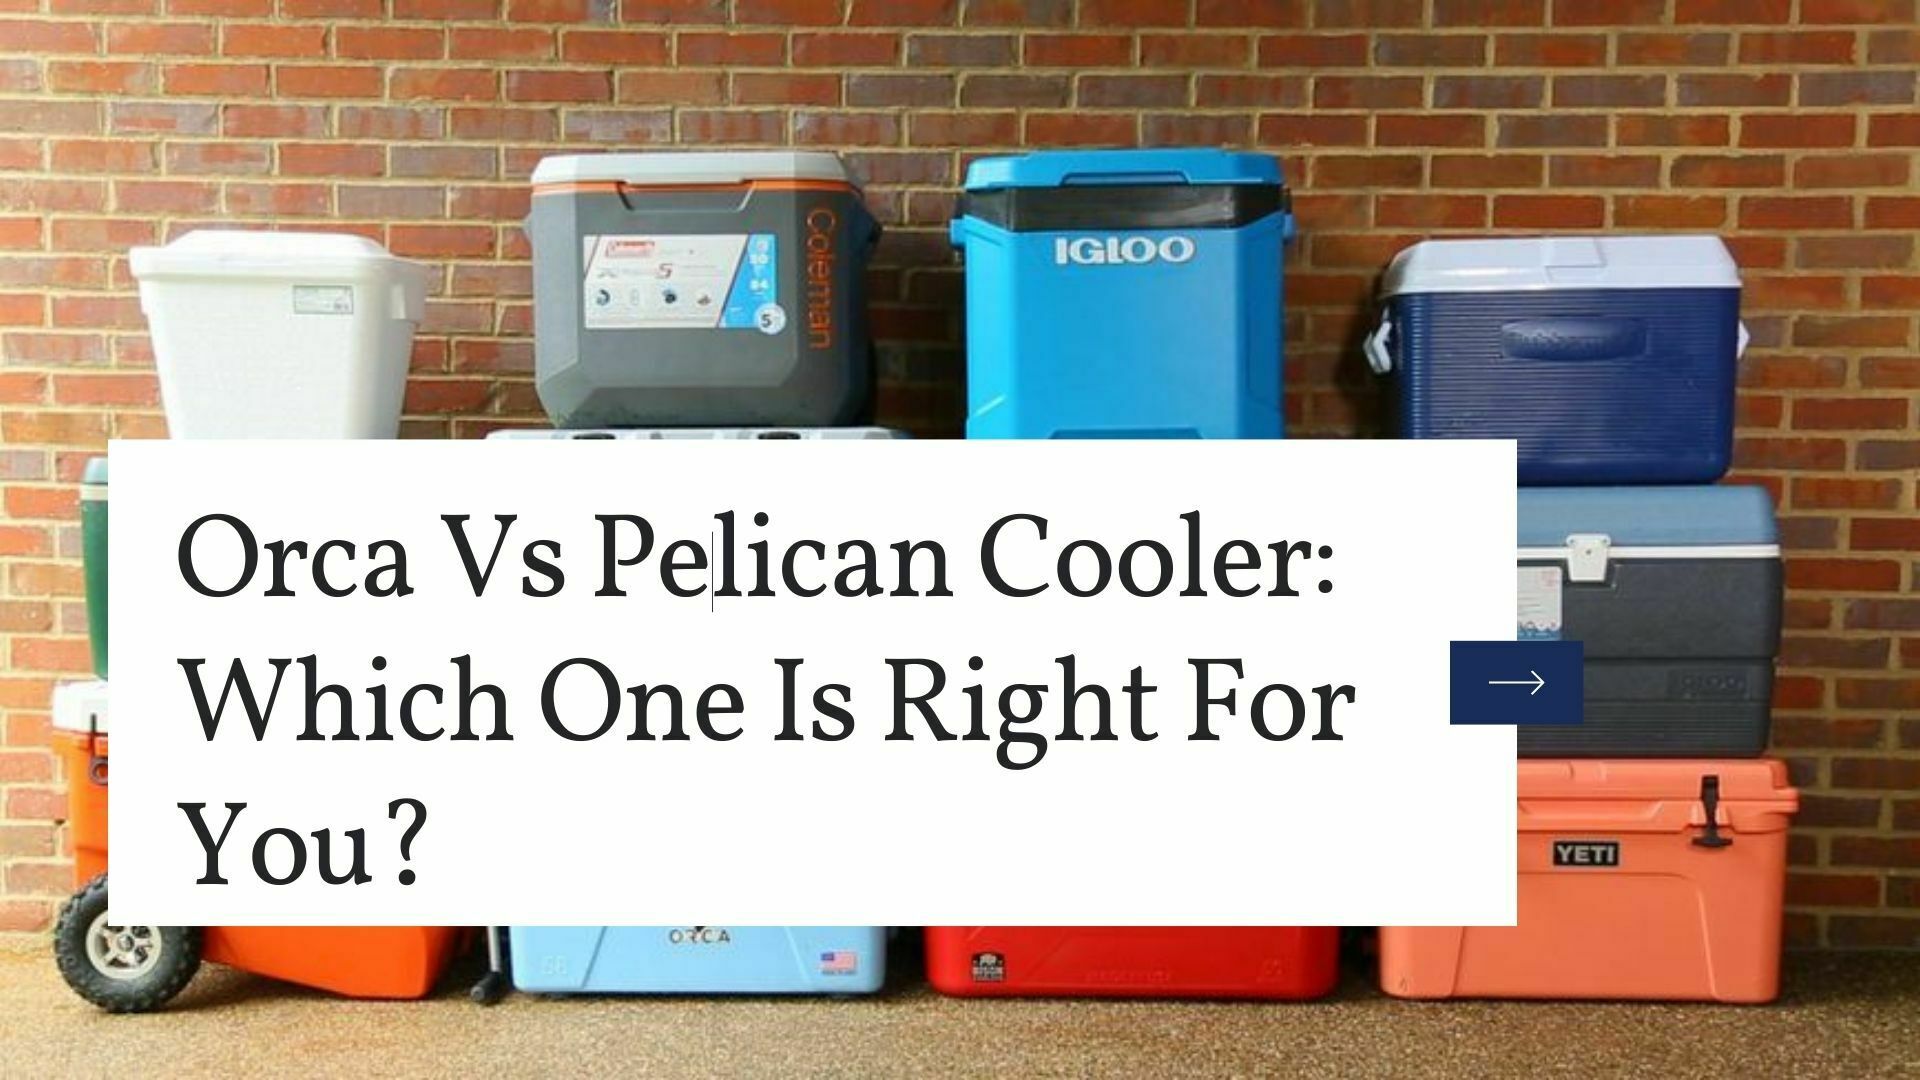 Orca Vs Pelican Cooler: Which One Is Right For You?